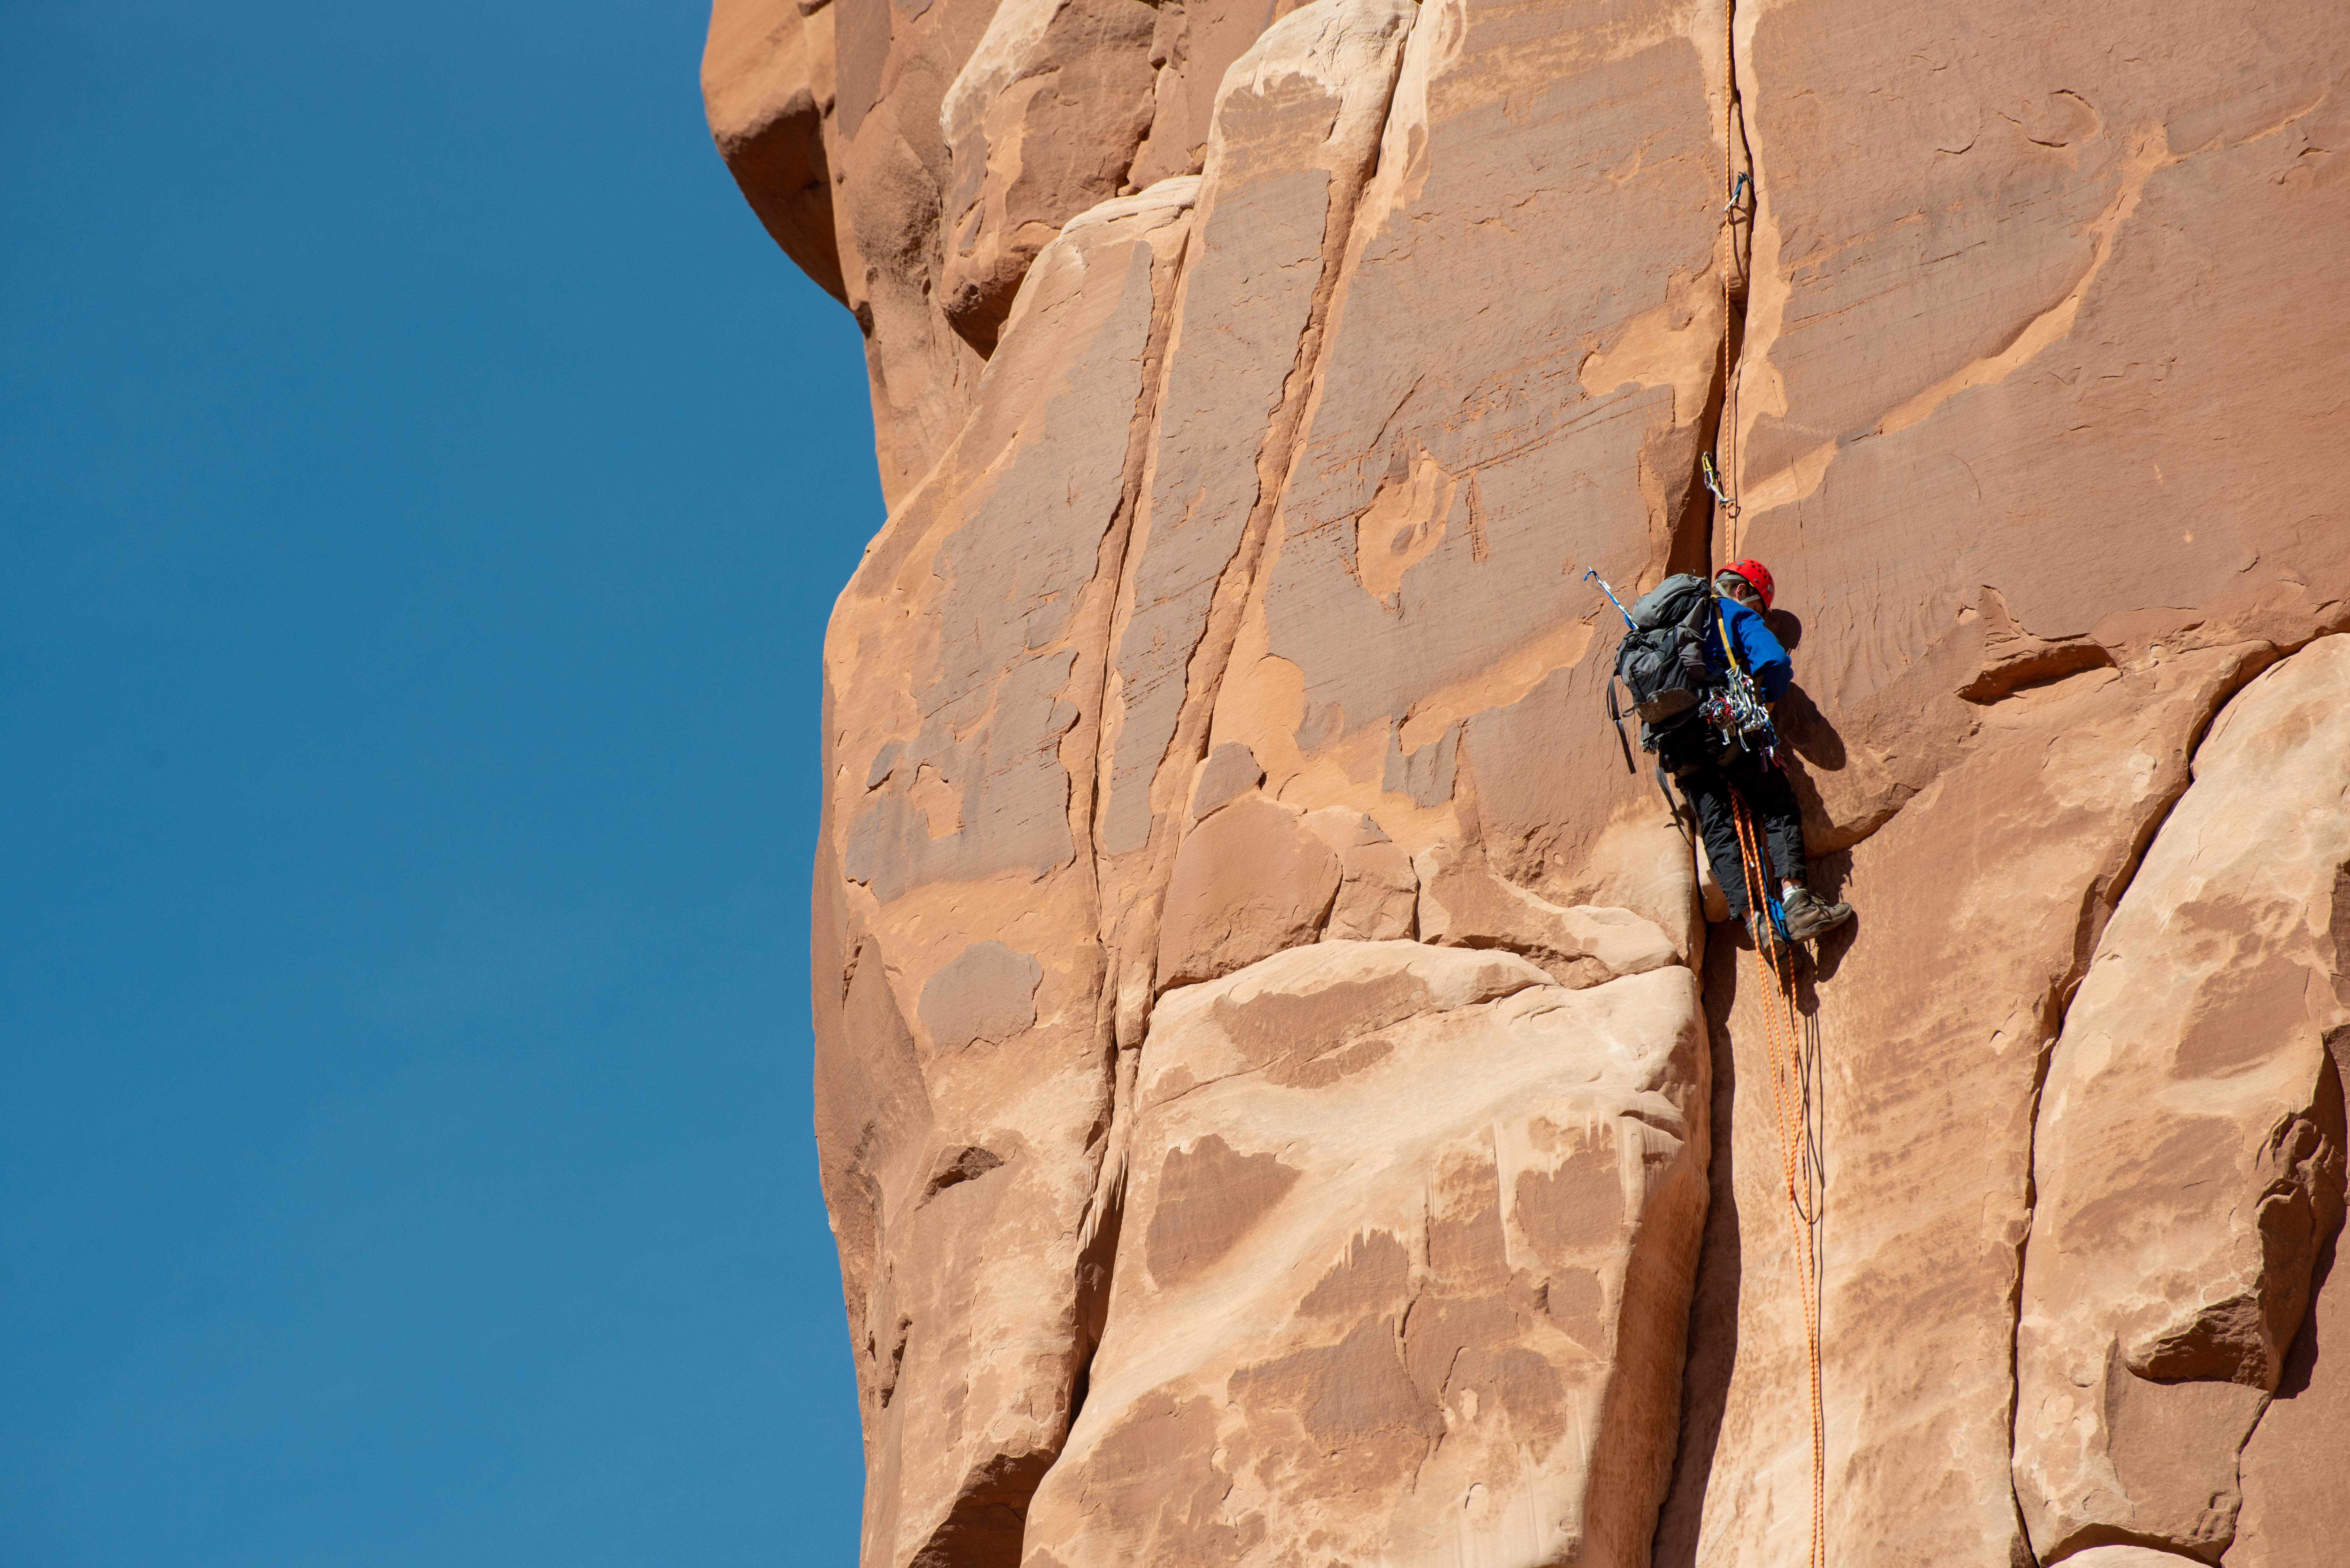 Climber with a helmet, backpack and other climbing gear ascends a route on a sandstone wall